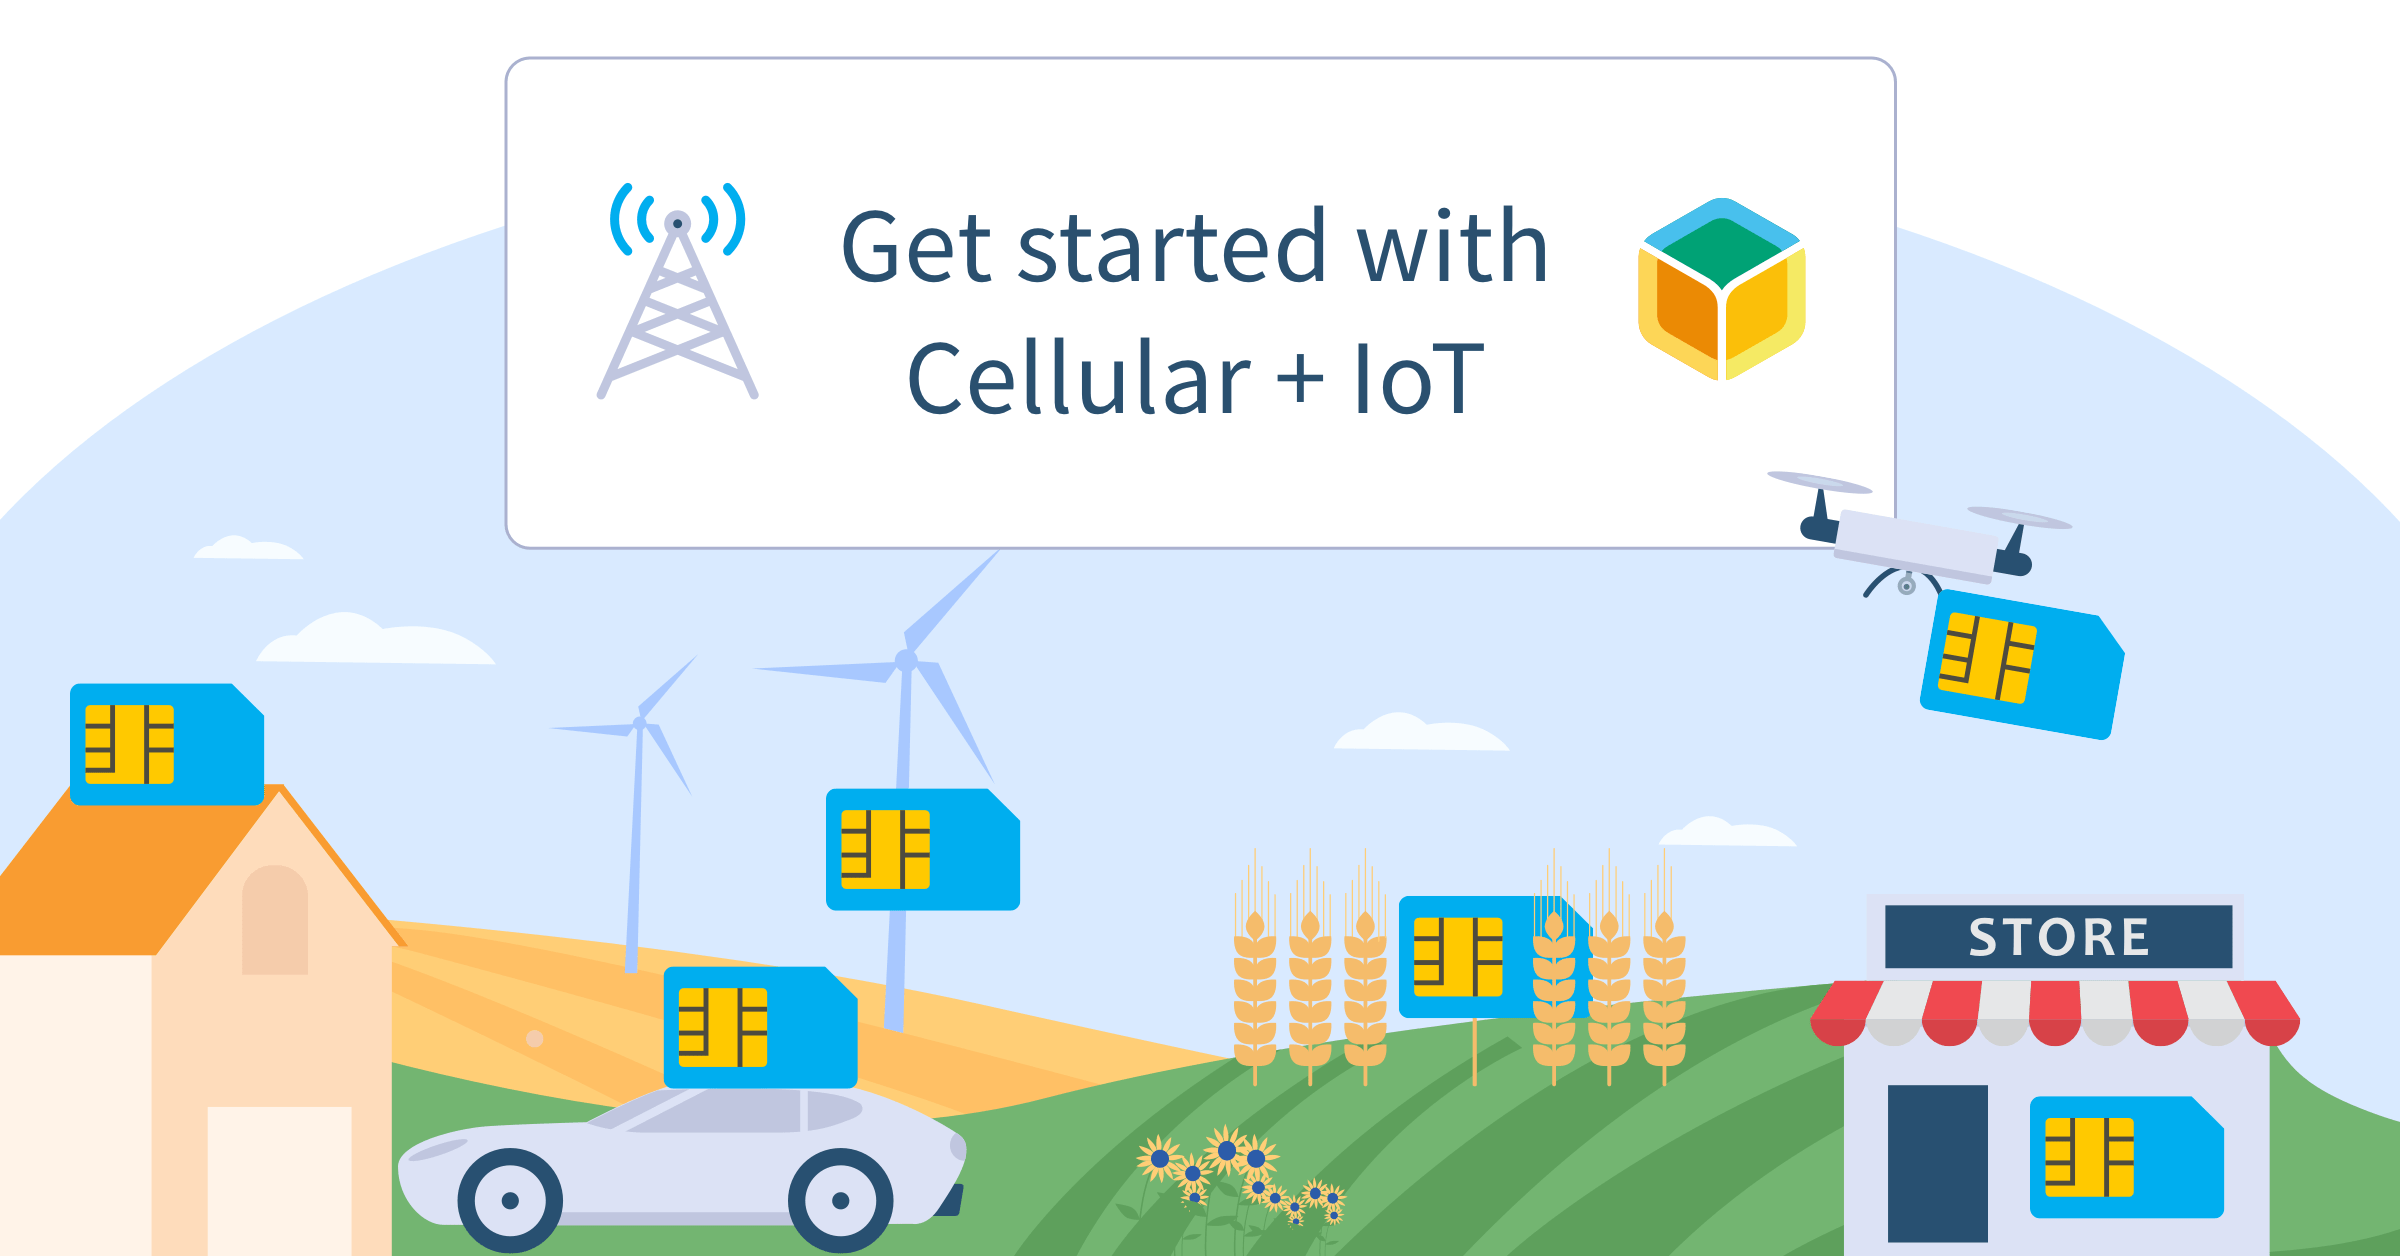 Cellular + IoT isn’t as hard as you think